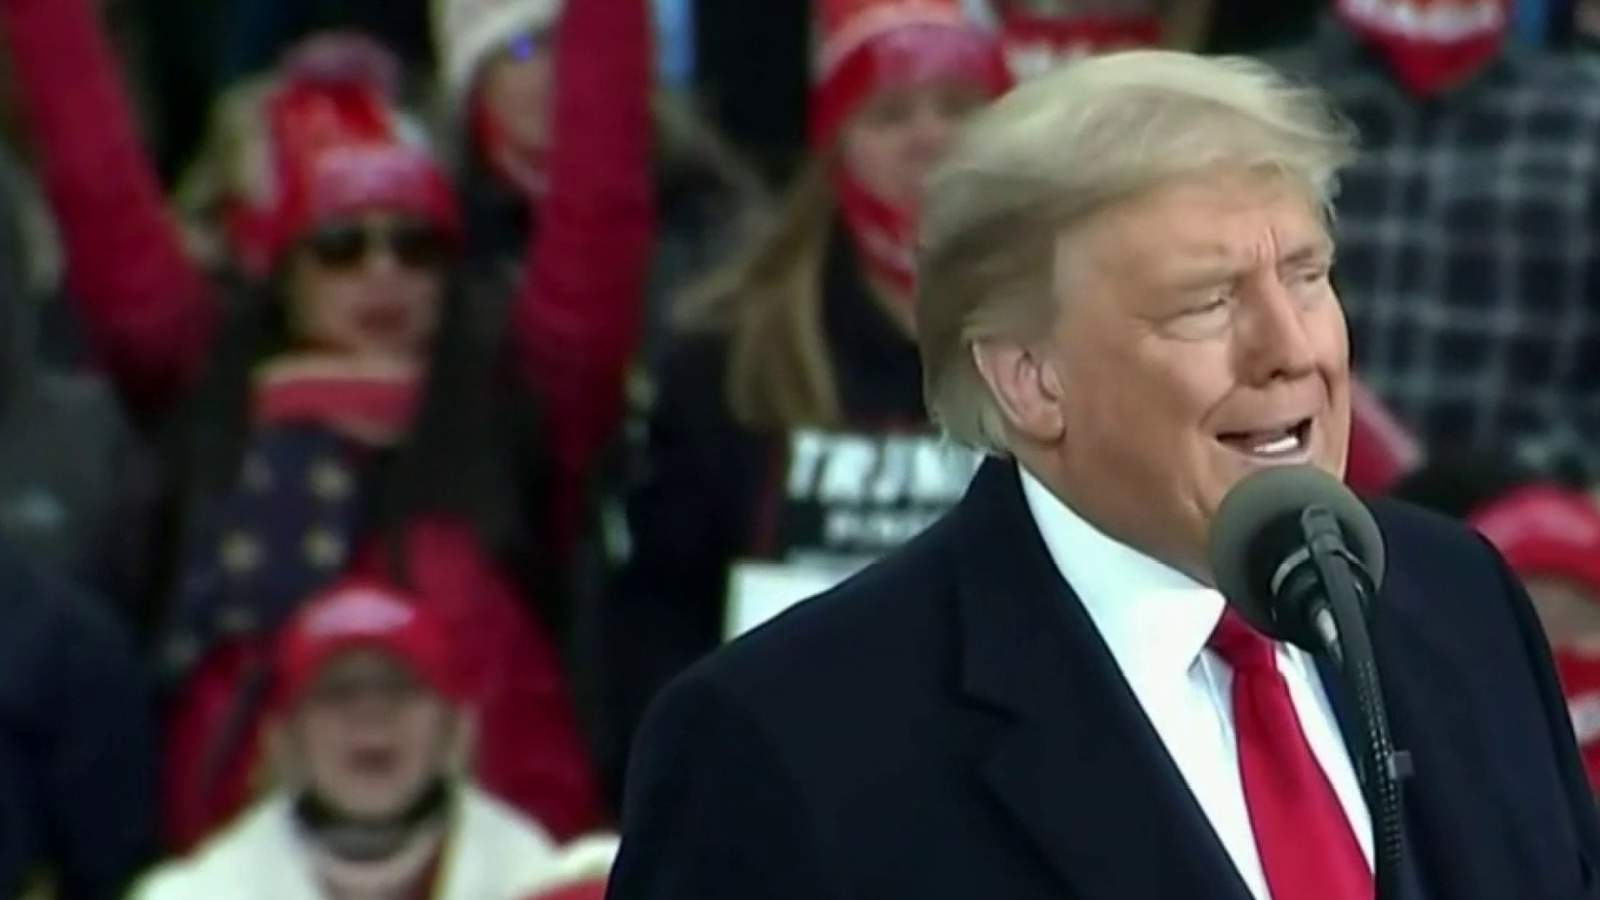 President Donald Trump hits out at Gov. Whitmer in ’60 Minutes' interview